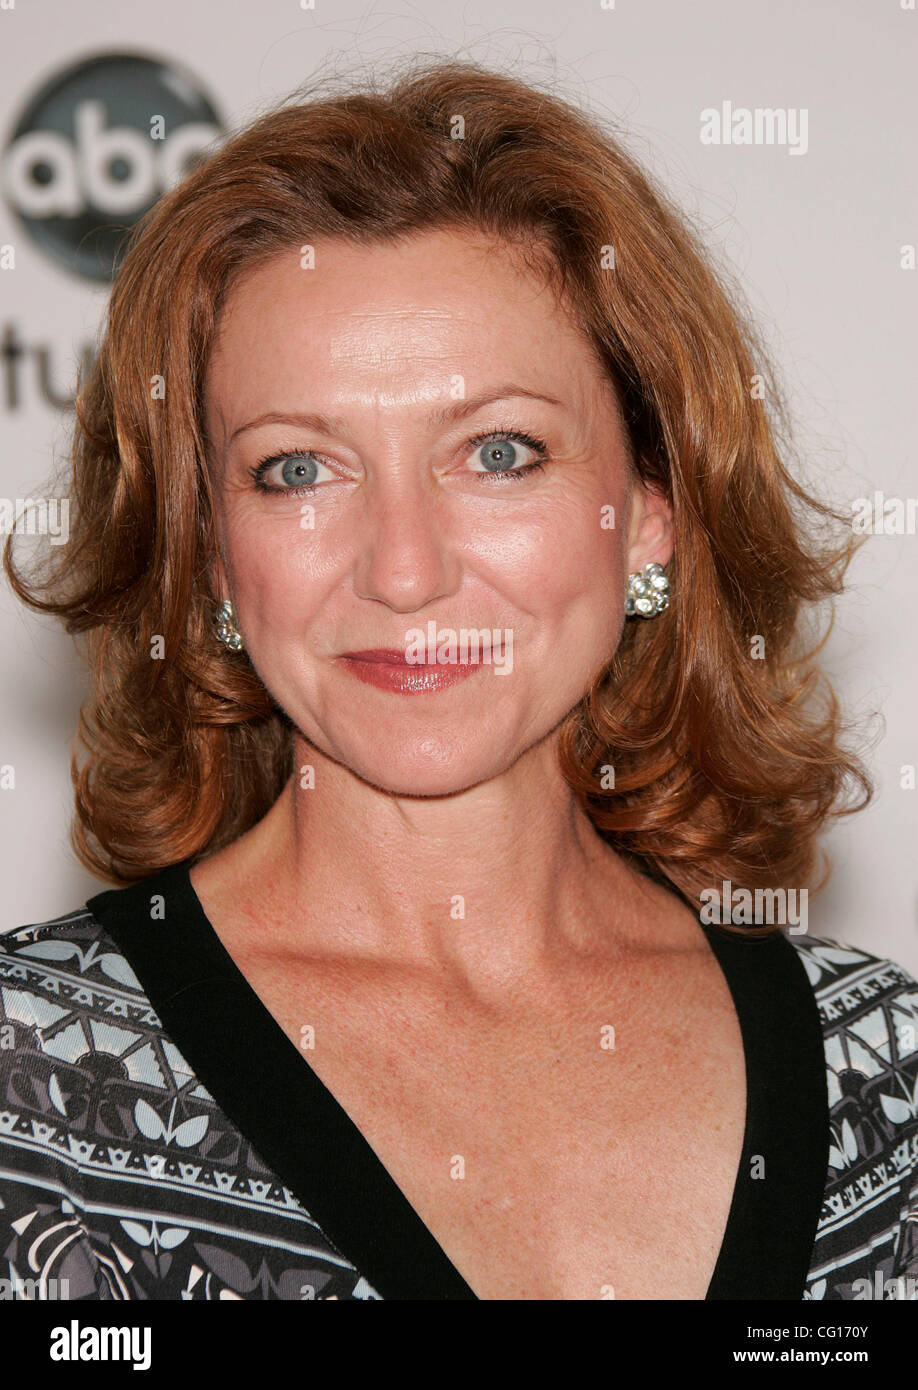 Jul 26, 2007 - Beverly Hills, CA, USA - JULIE WHITE at the ABC Summer press tour all-star party held at the Hilton Hotel. (Credit Image: © Lisa O'Connor/ZUMA Press) Stock Photo